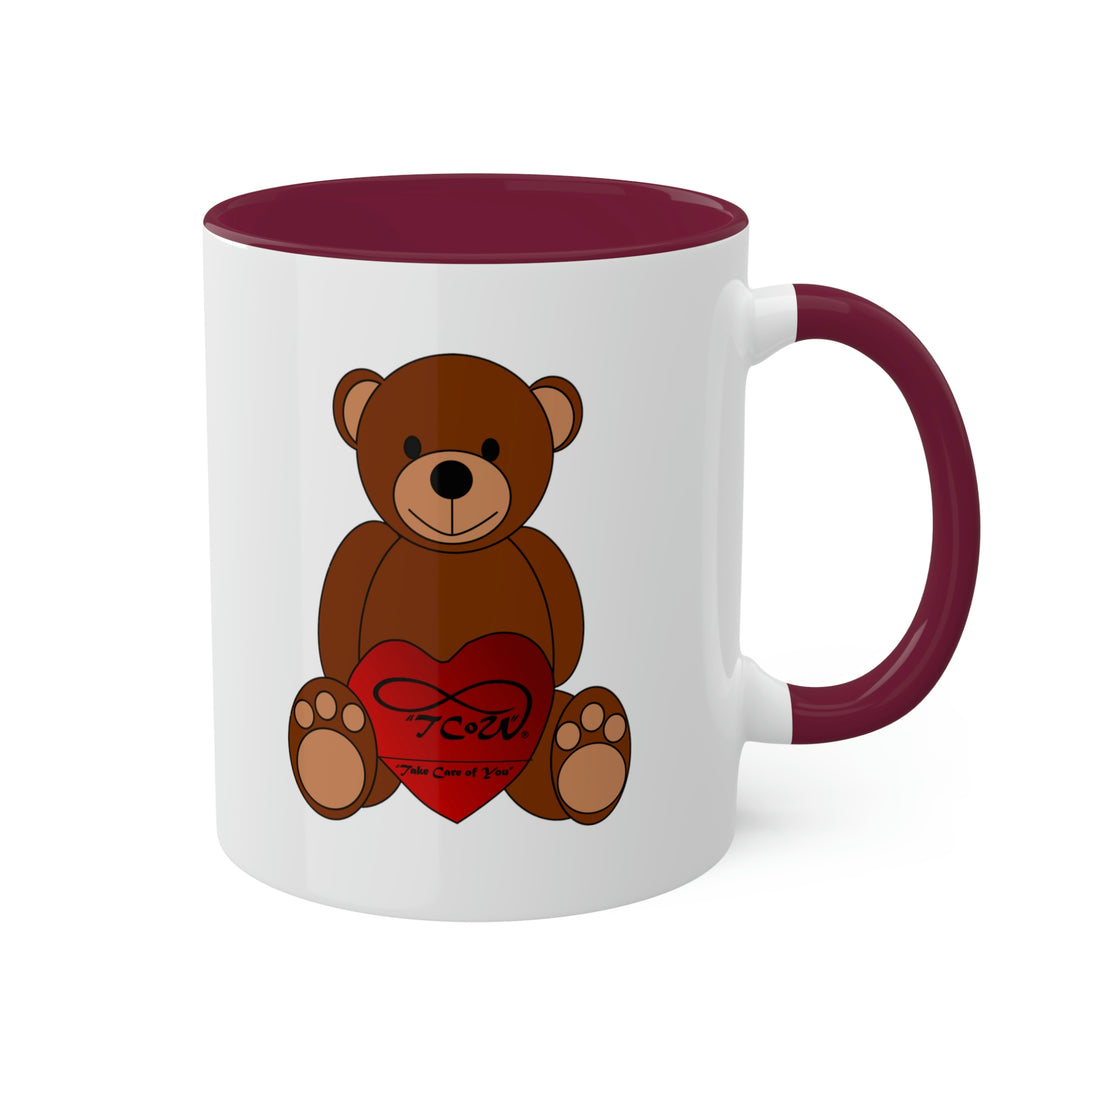 Love Starts With ME! several Color Mugs, 11oz --